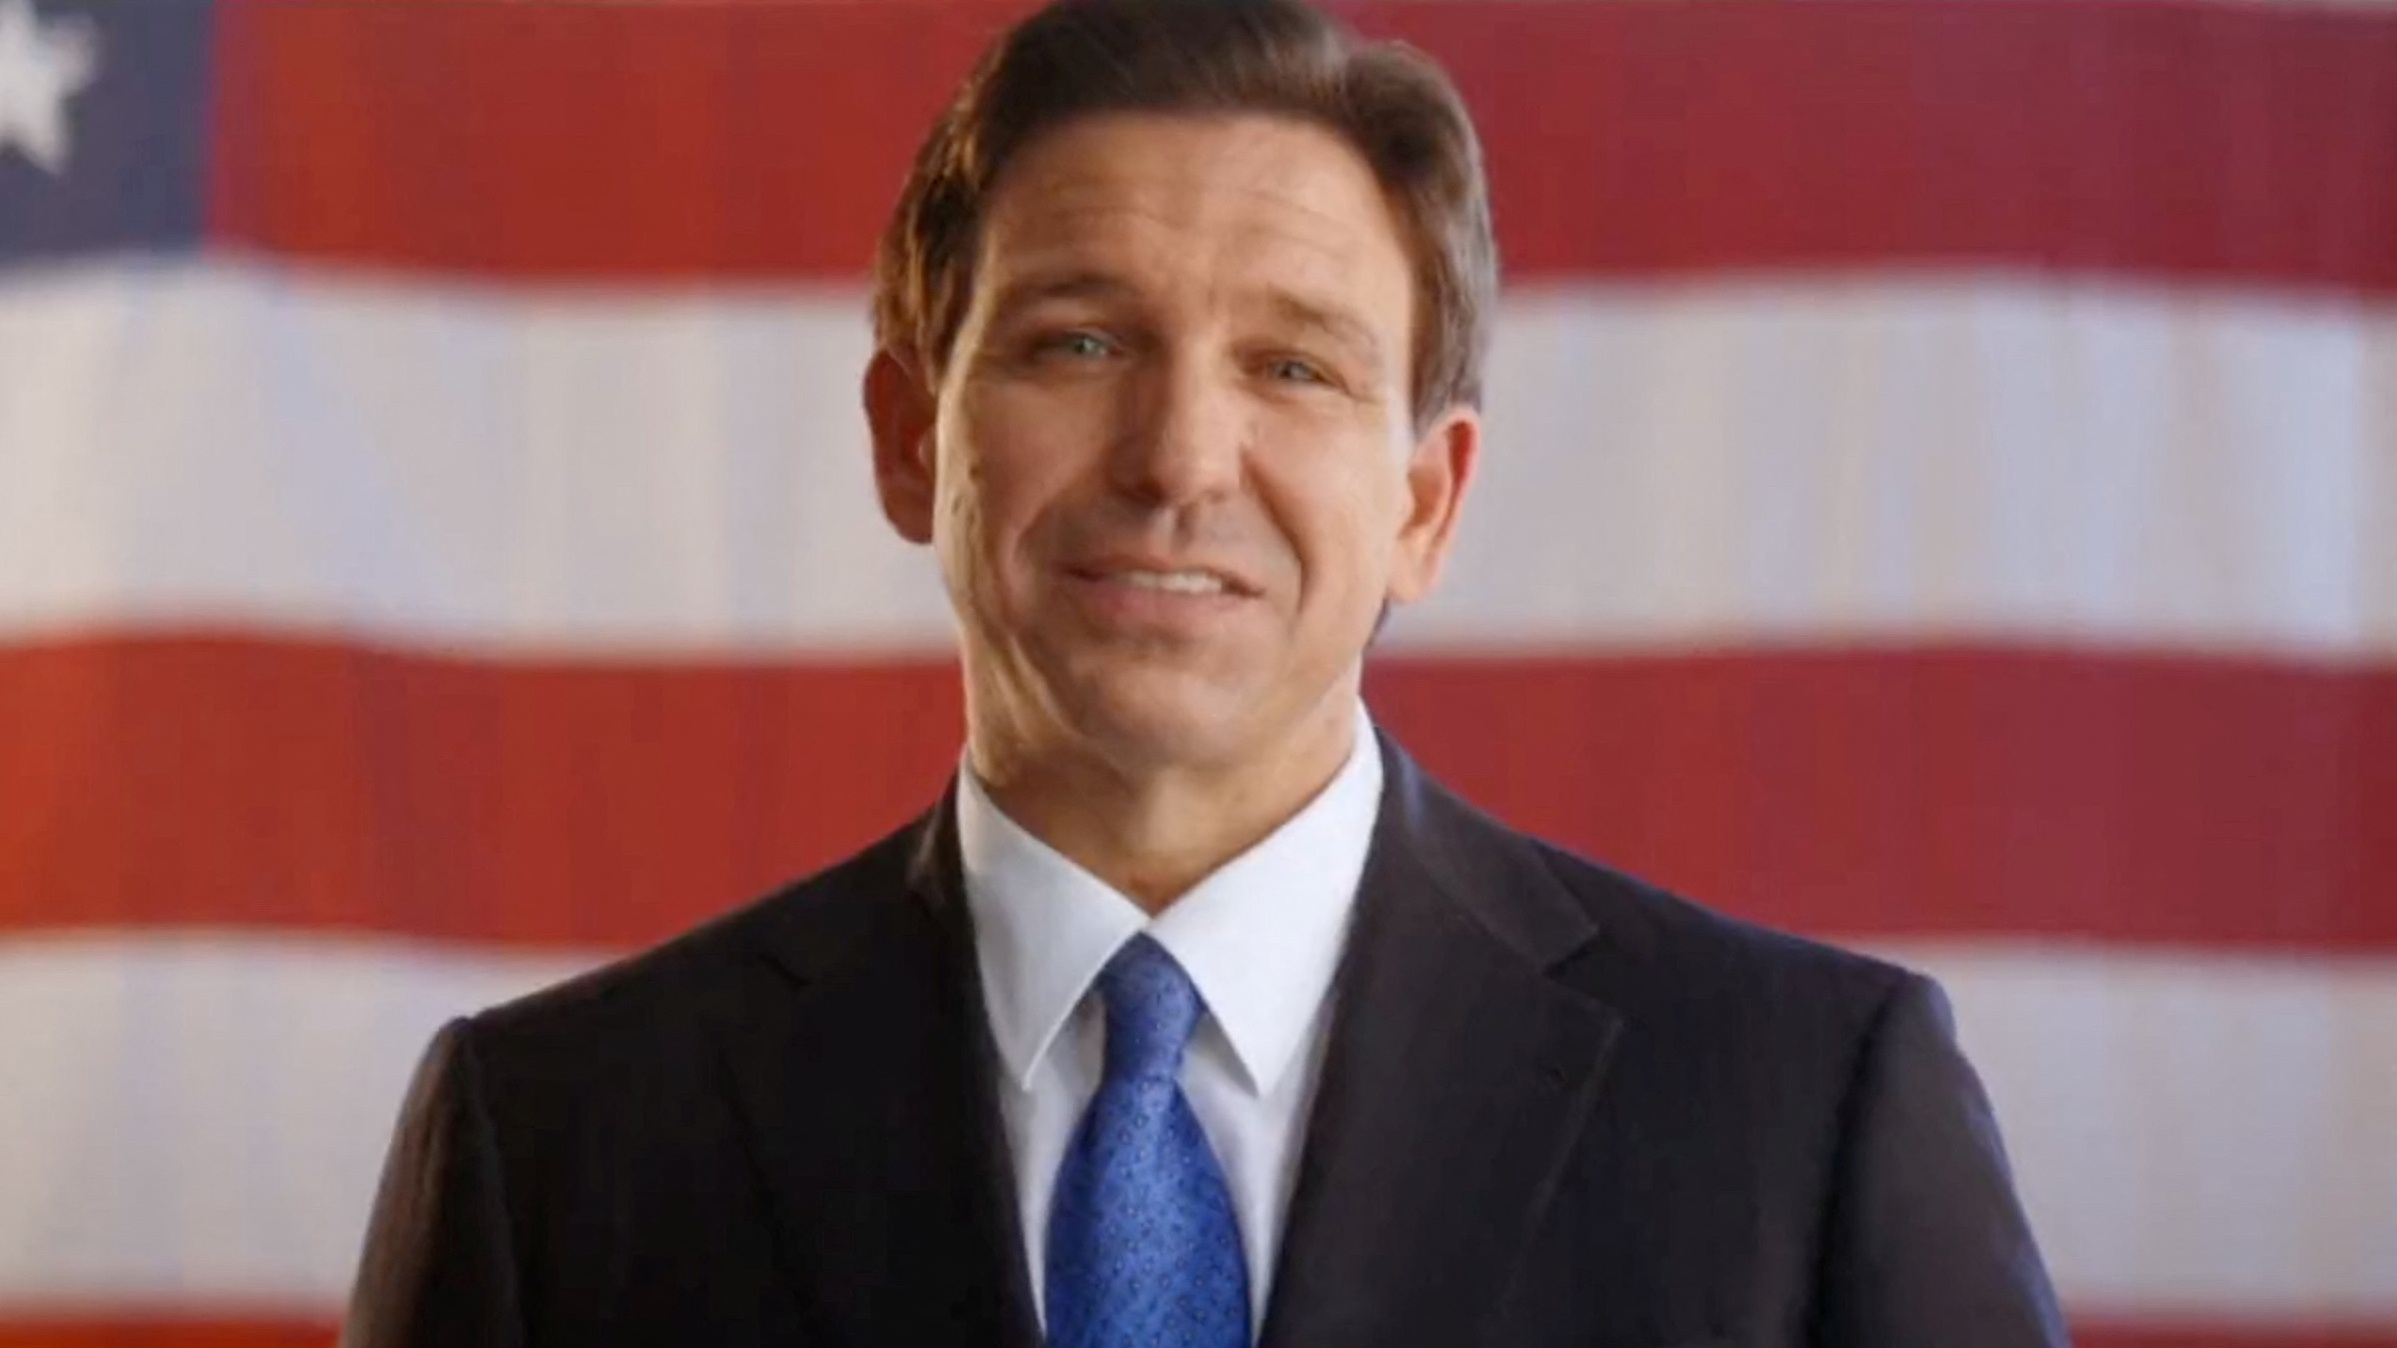 Governor of the U.S. State of Florida Ron DeSantis announces he is running for the 2024 Republican presidential nomination in this screen grab from a social media video posted May 24, 2023. /Reuters